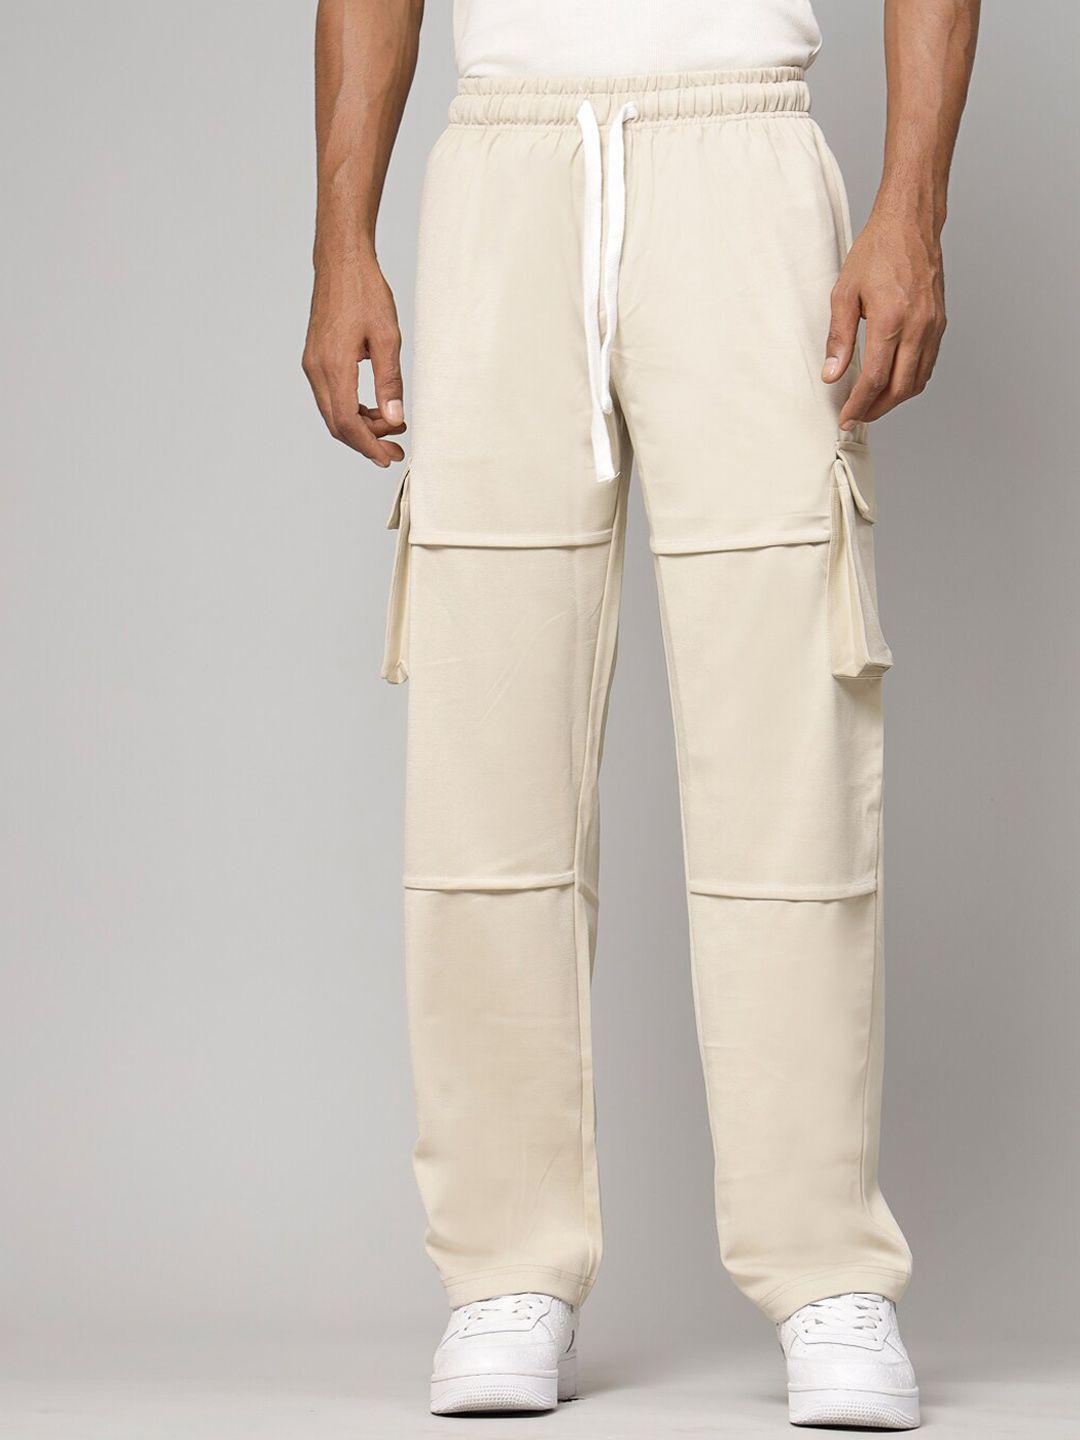 everdion-men-relaxed-straight-leg-straight-fit-high-rise-cargos-trousers